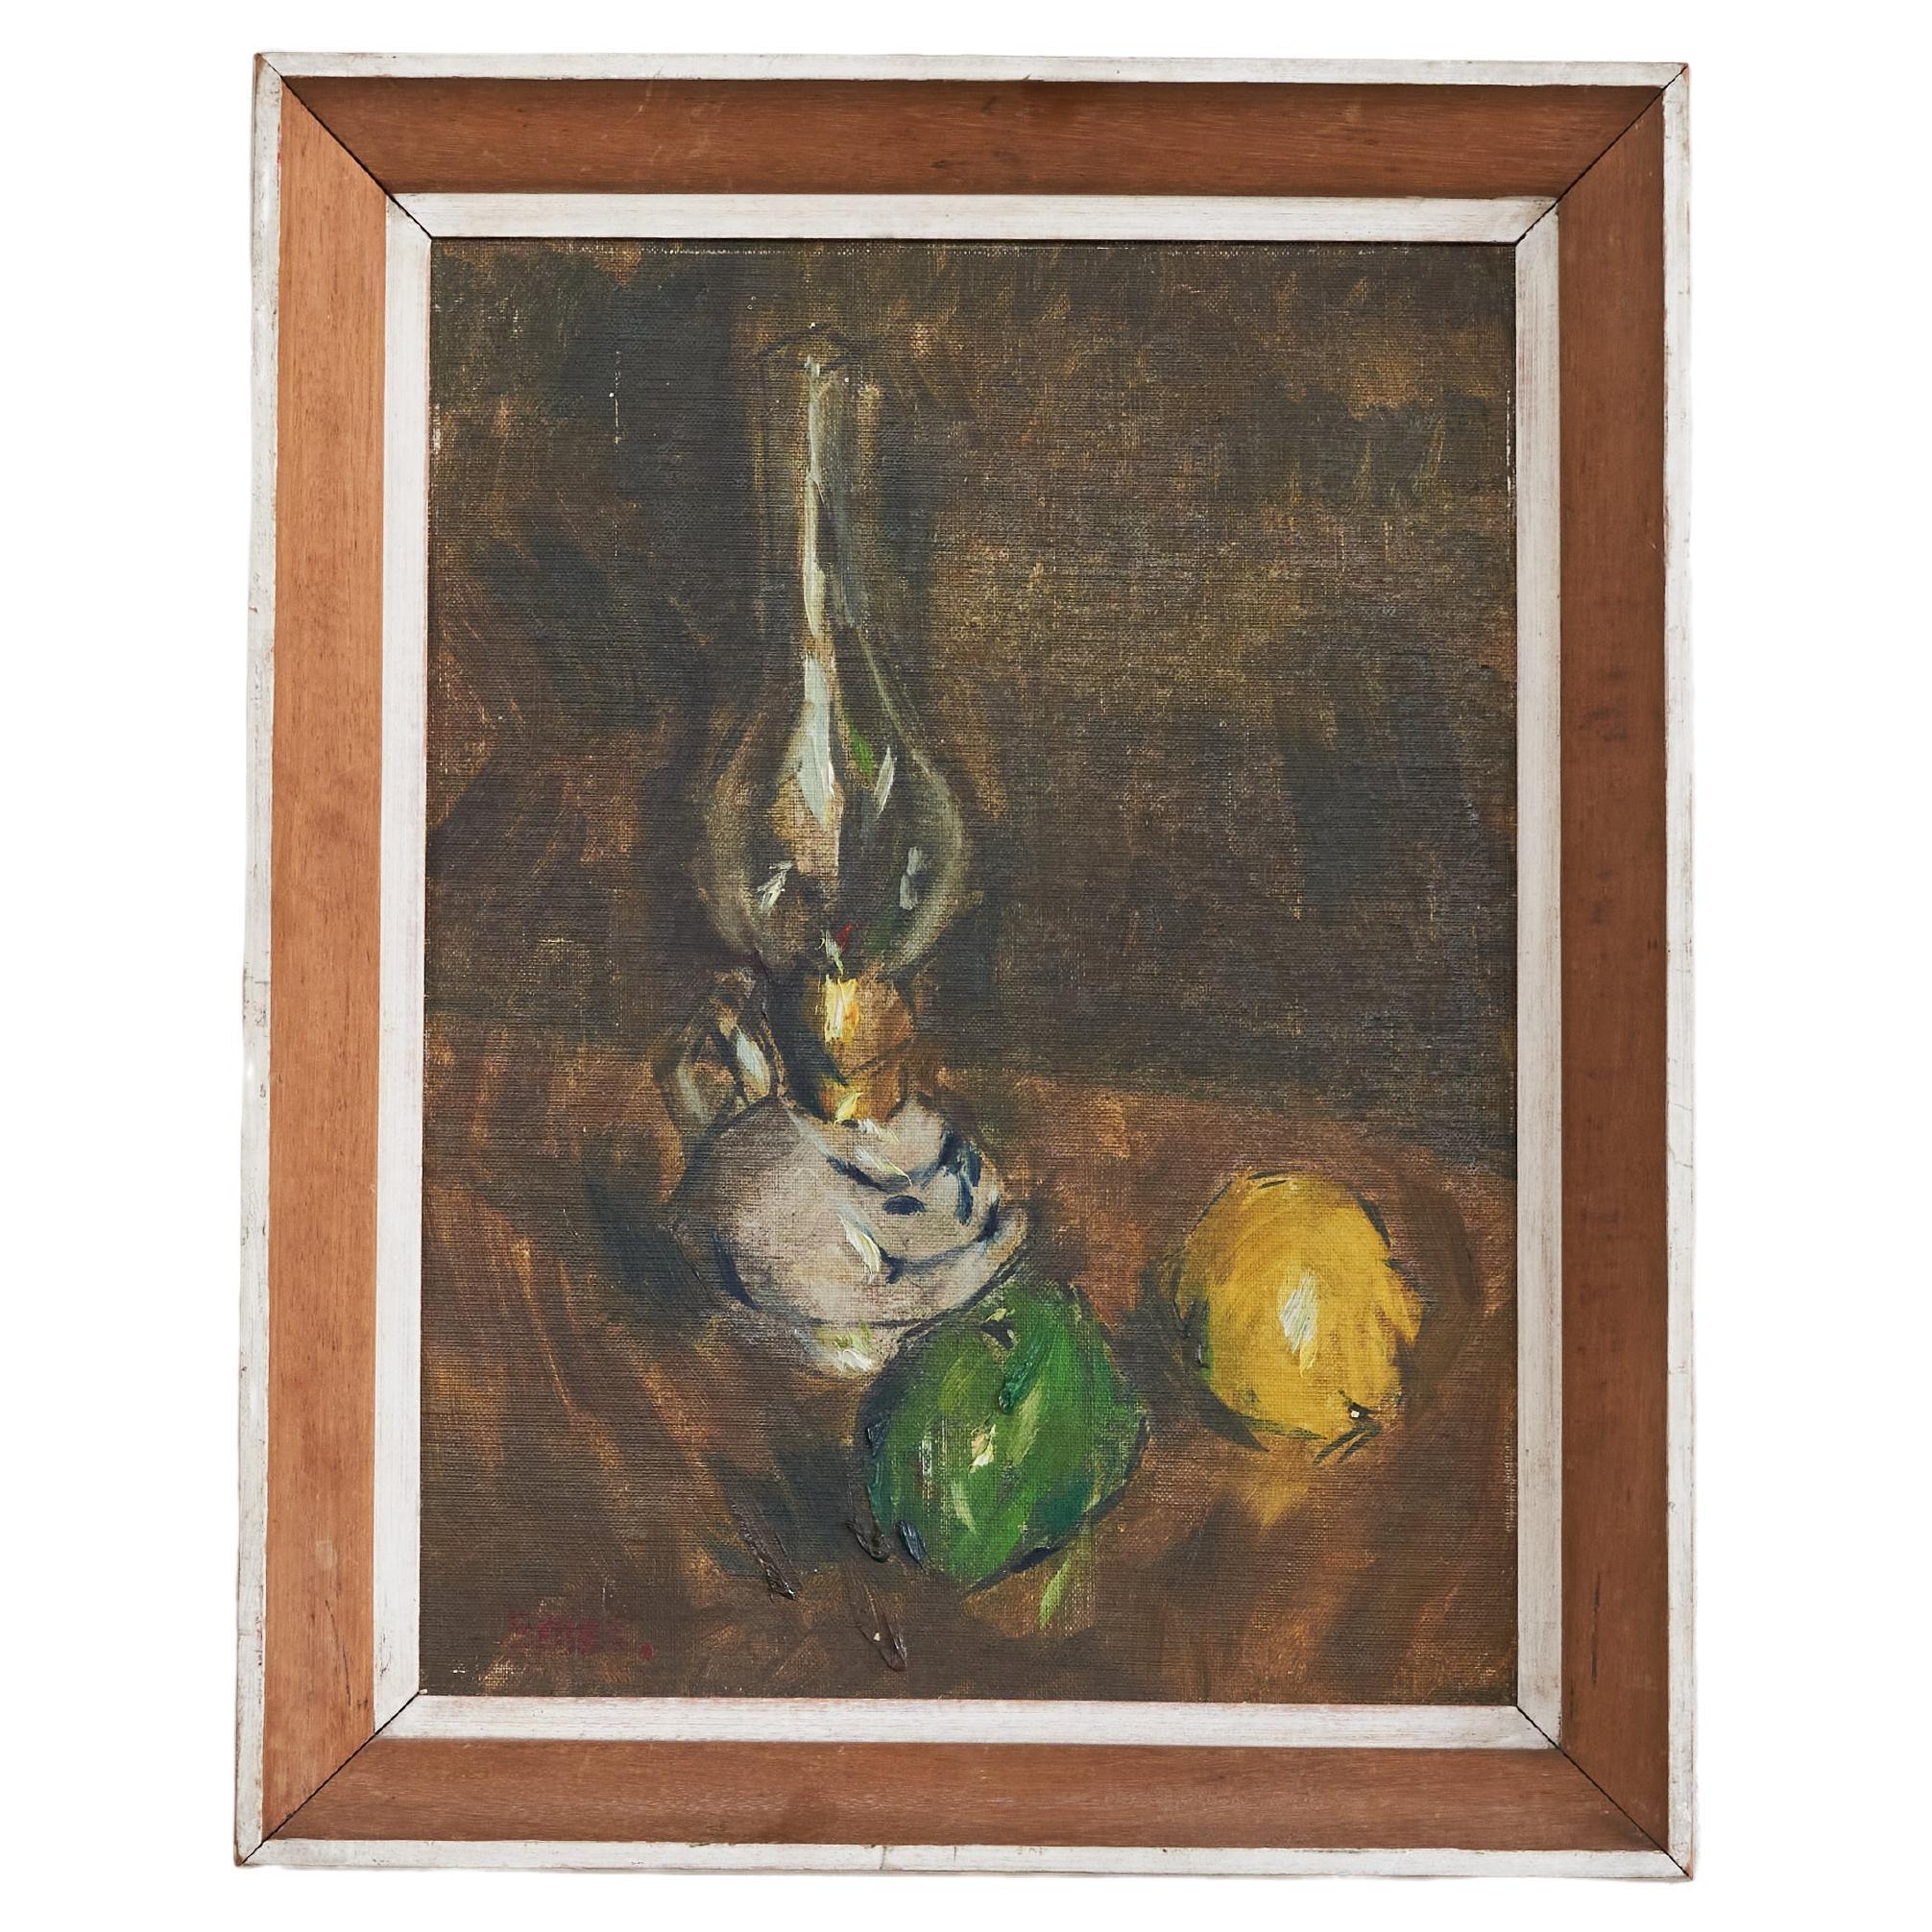 Gustave de Smet 'Still Life with Oil Lamp and Fruit' Oil on Board 1930s